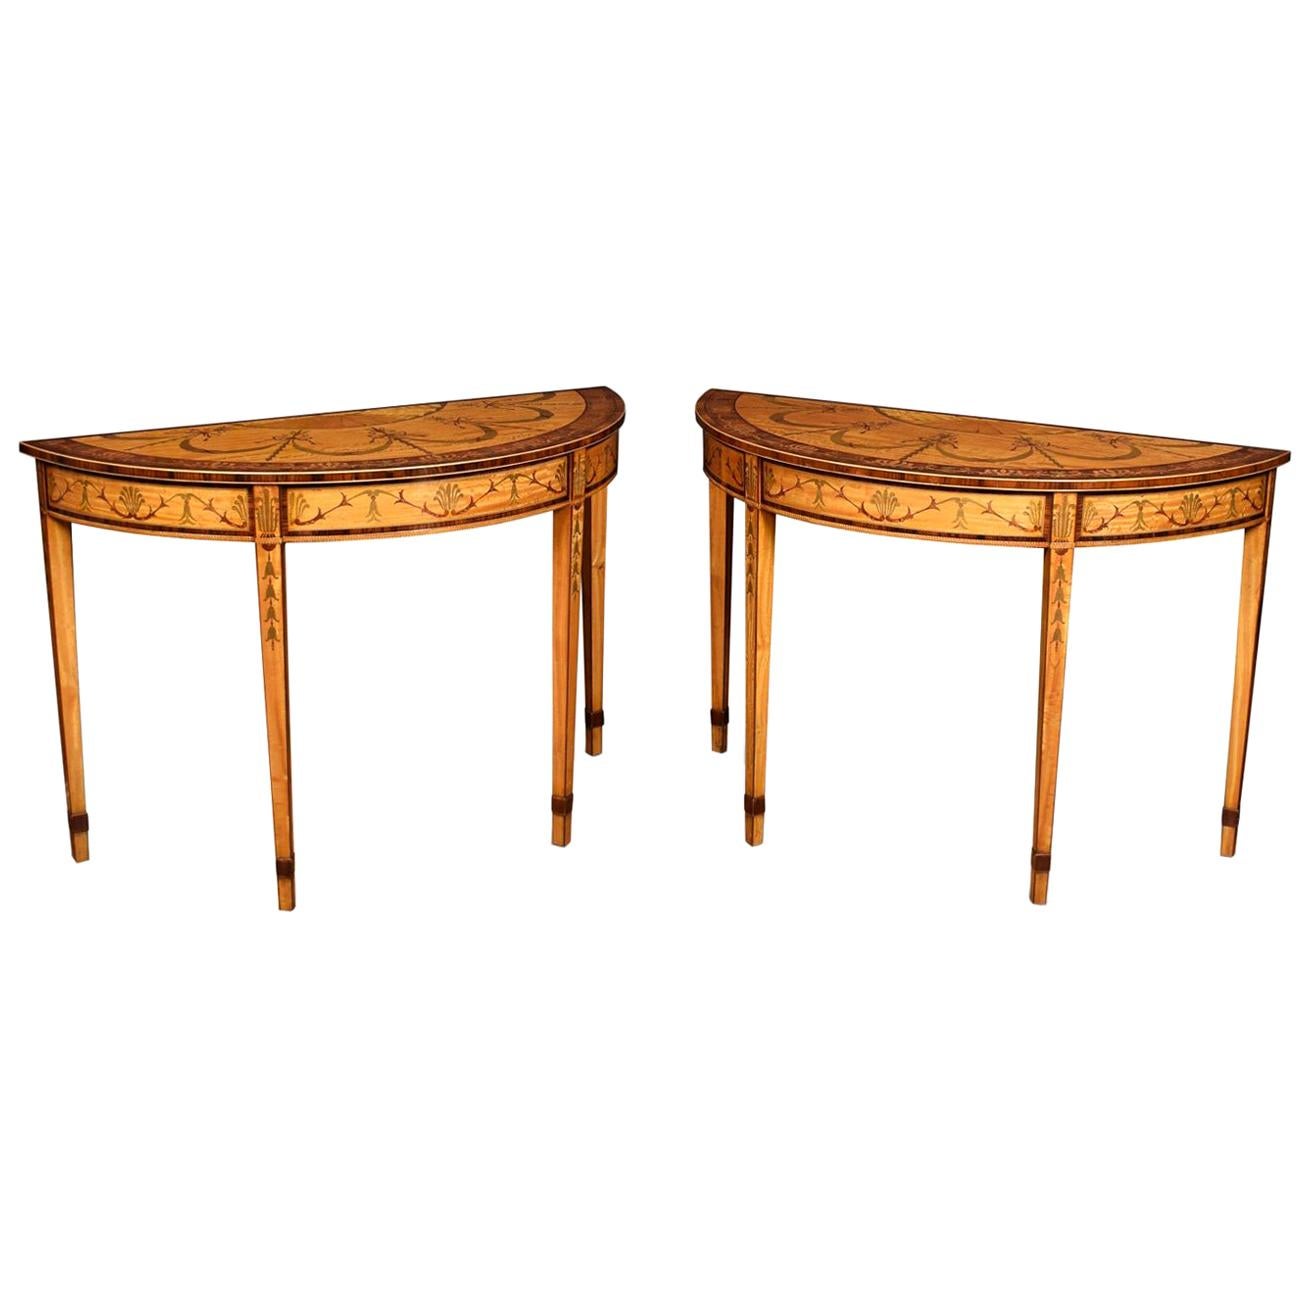 Pair of Satinwood Inlaid Neoclassical Style Demilune Console Tables